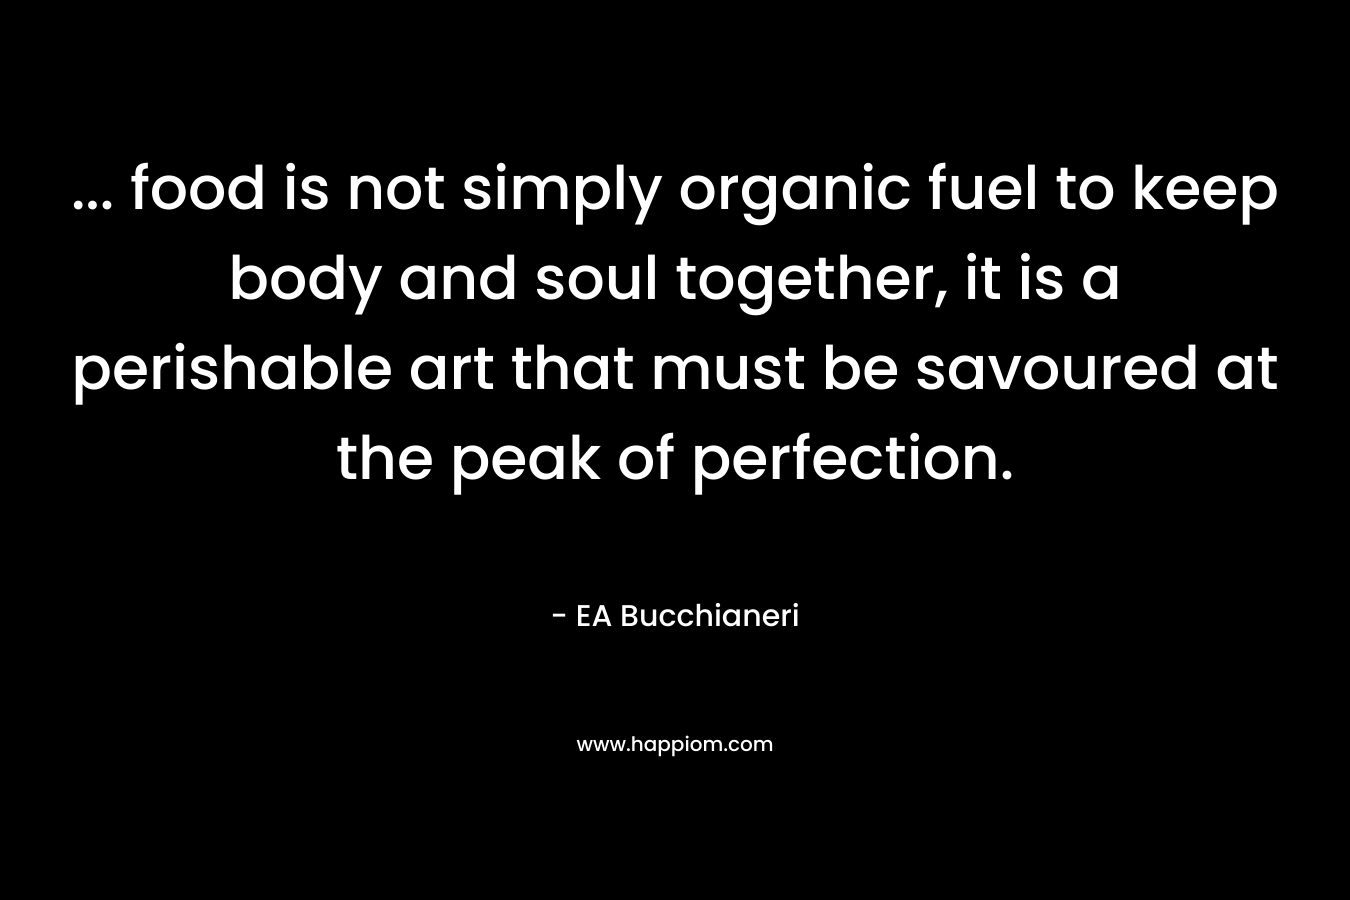 … food is not simply organic fuel to keep body and soul together, it is a perishable art that must be savoured at the peak of perfection. – EA Bucchianeri